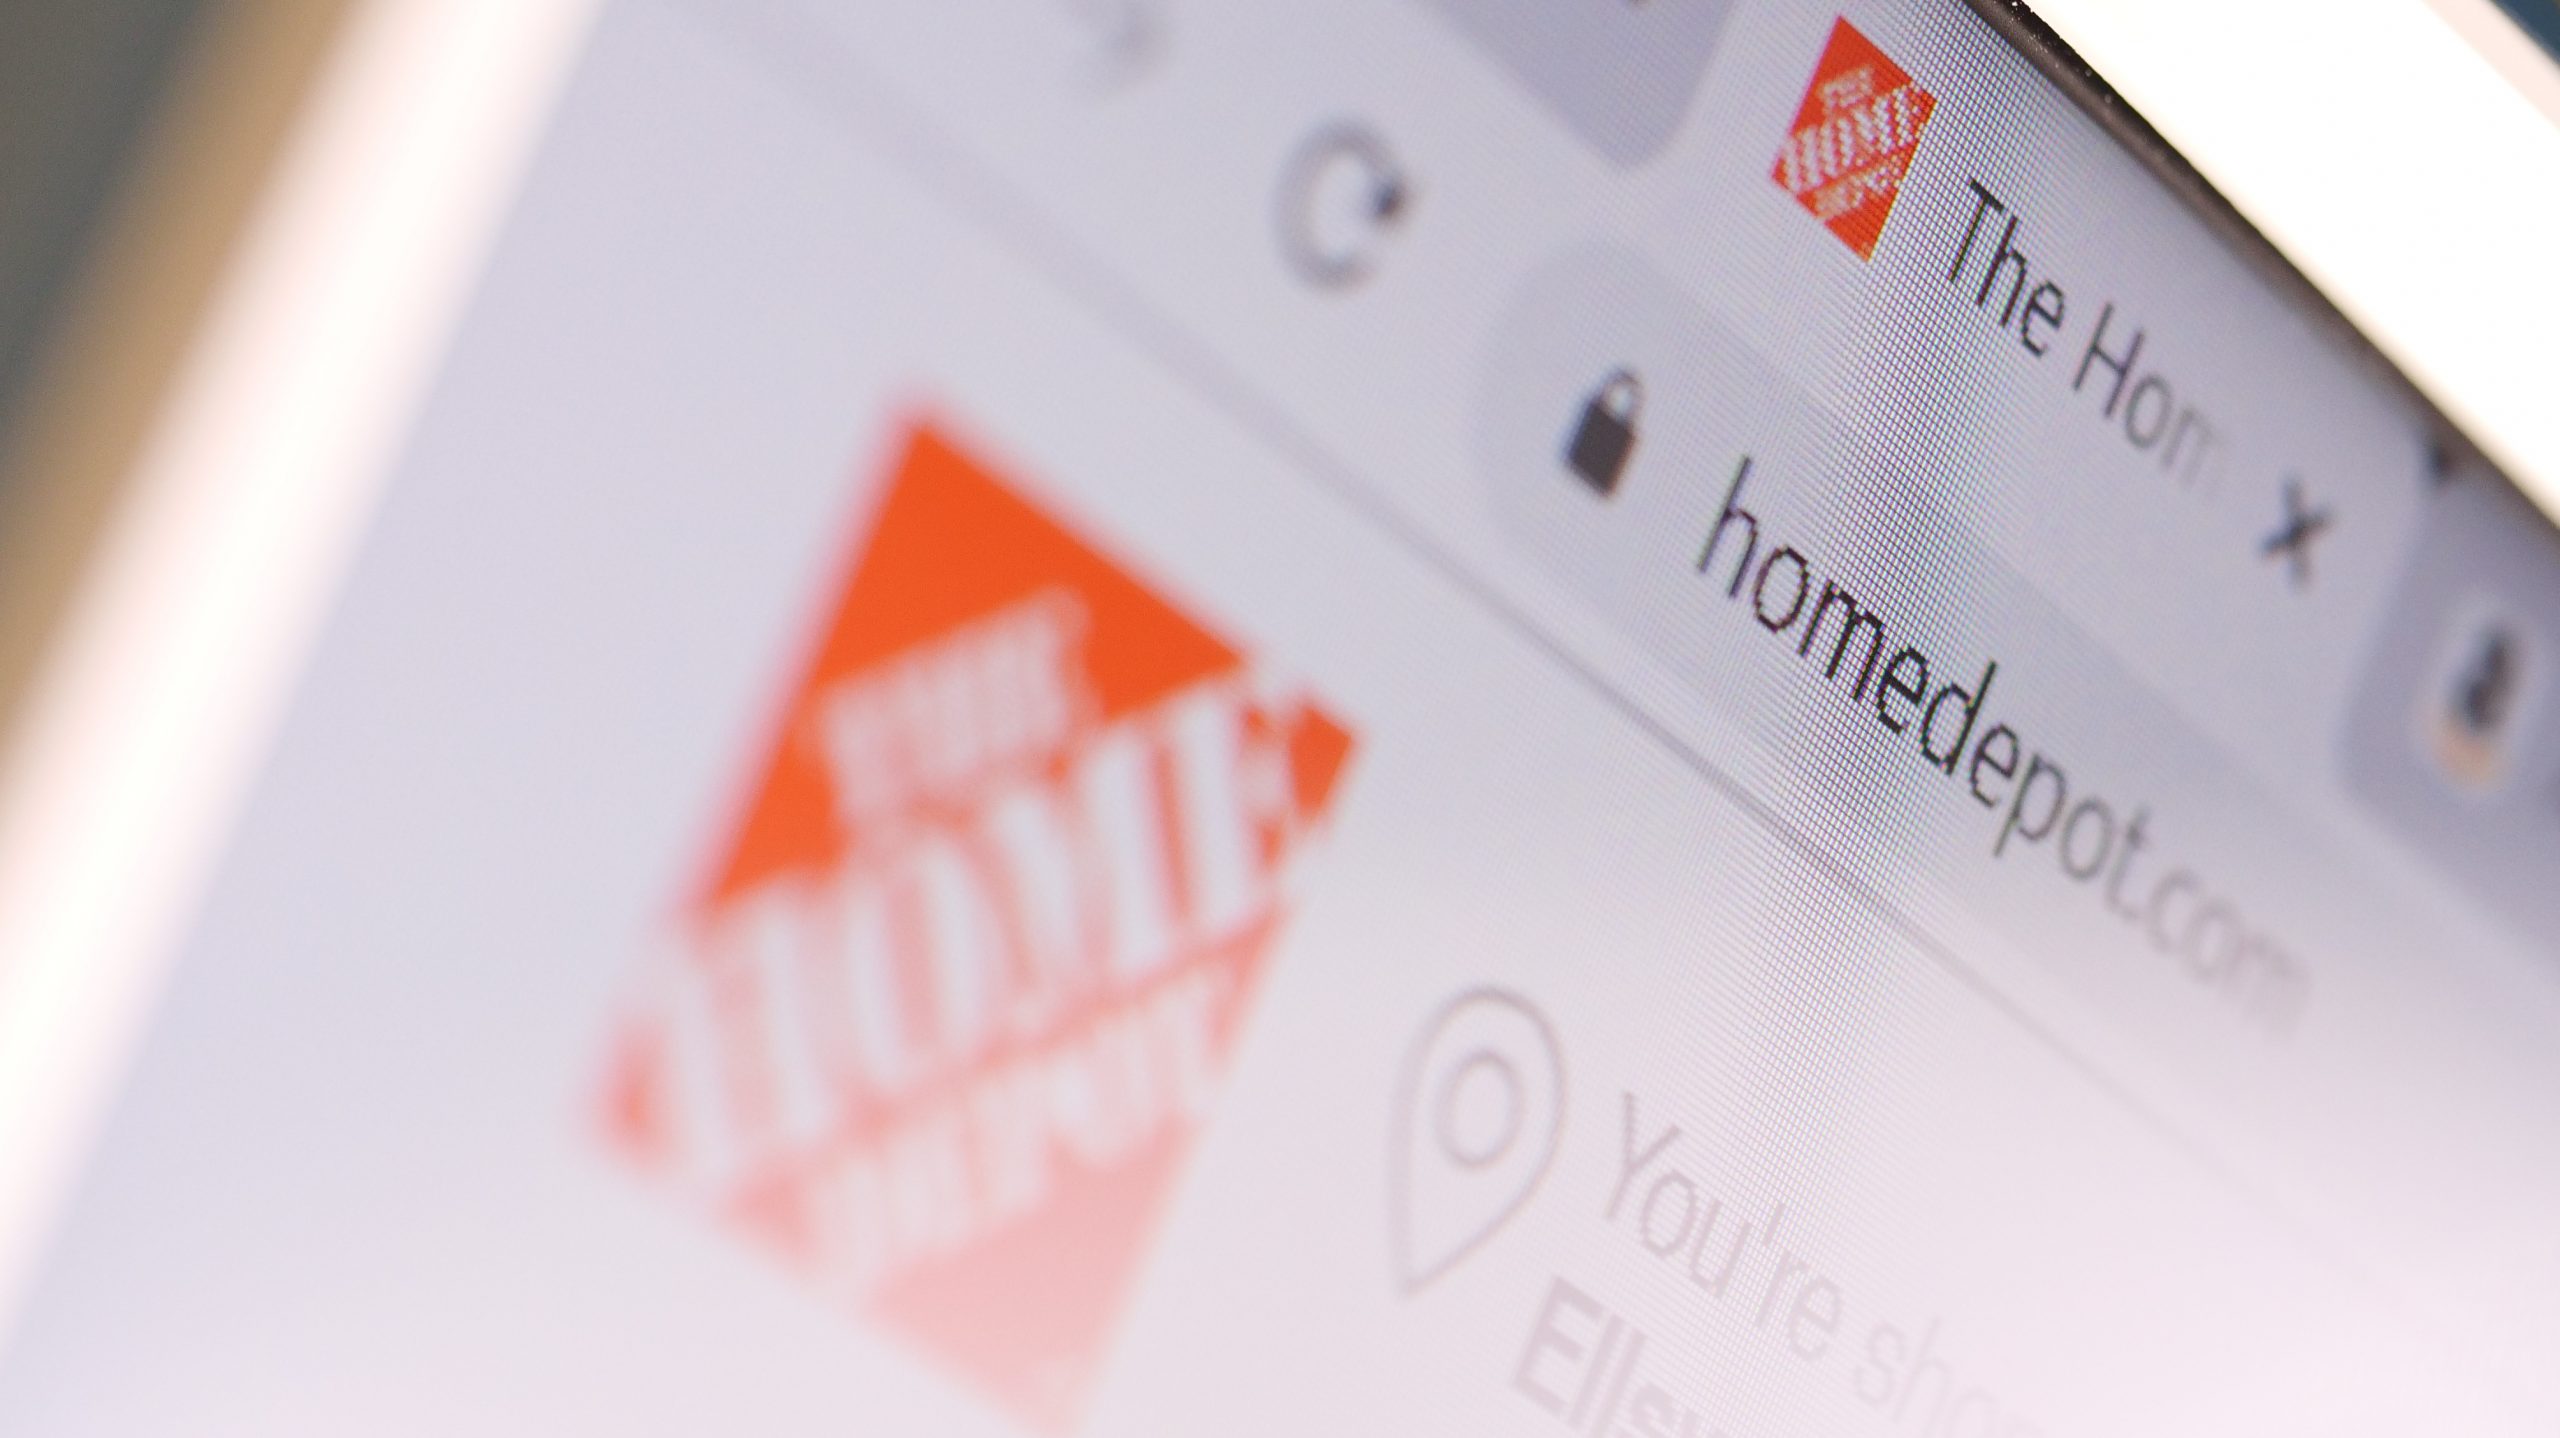 The Home Depot domain name in browser and logo on the computer screen.